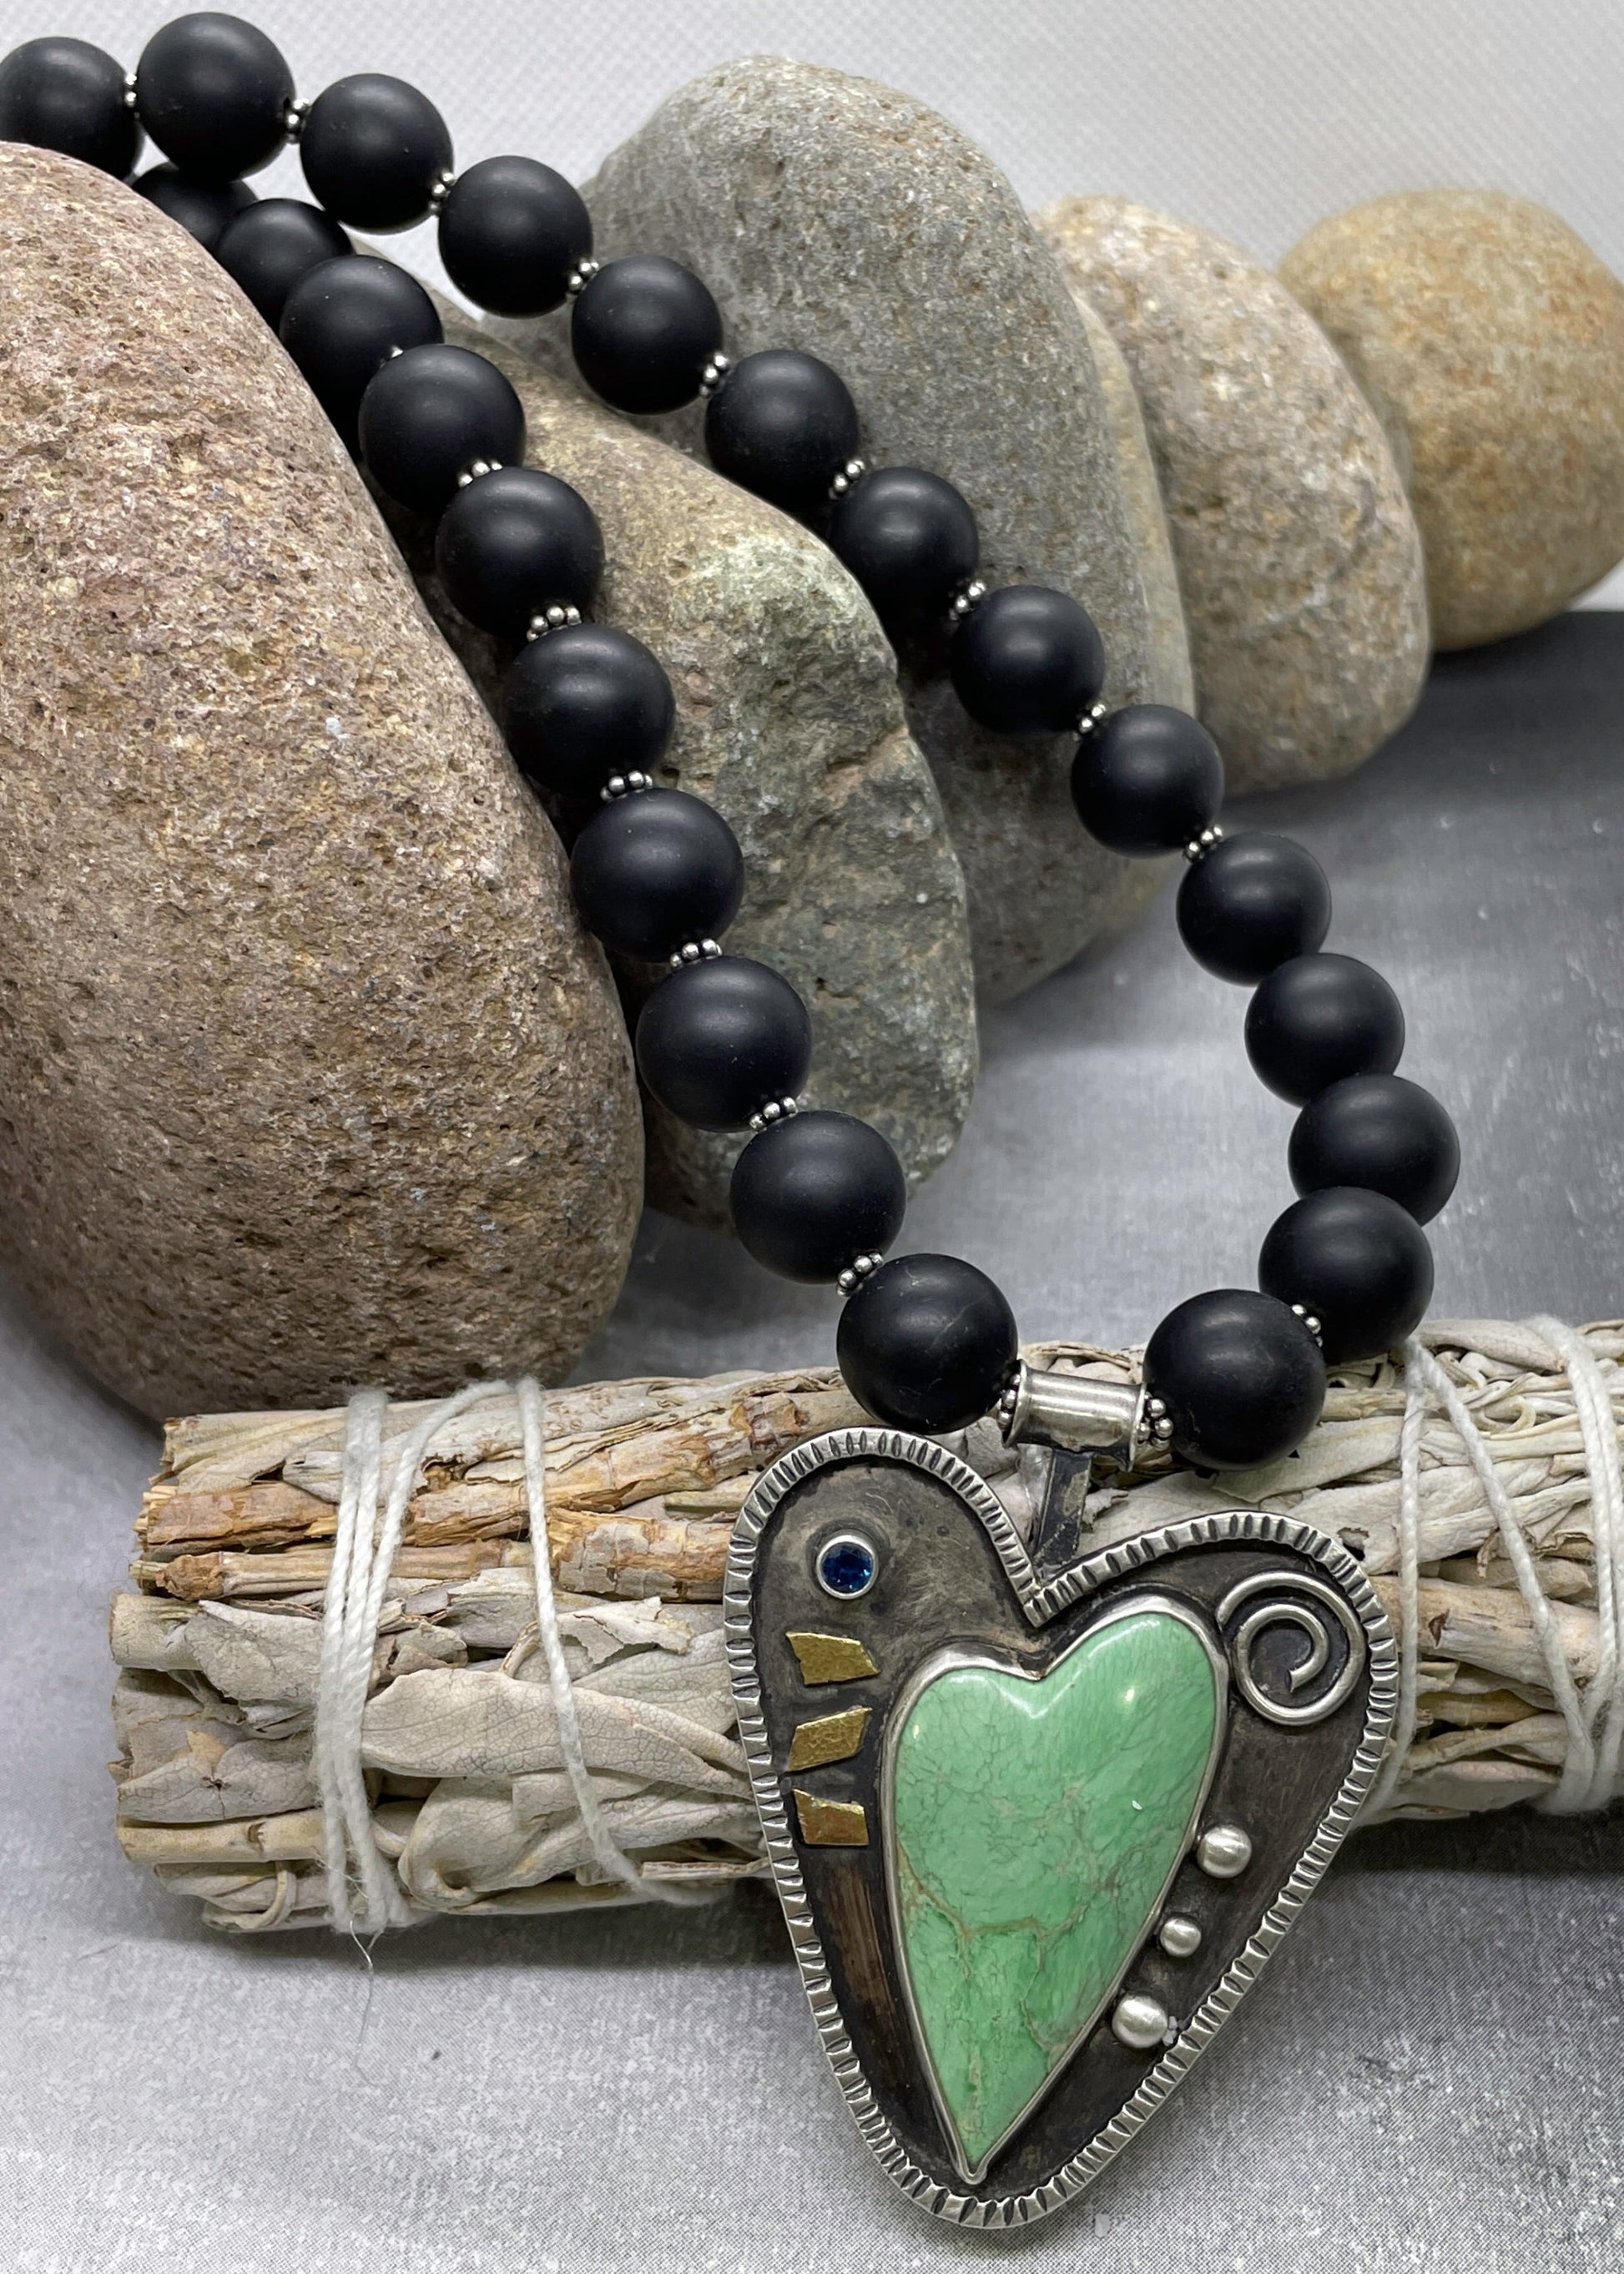 Heart Shaped Pendant with Variscite and Matte Black Onyx Necklace - Sable Design